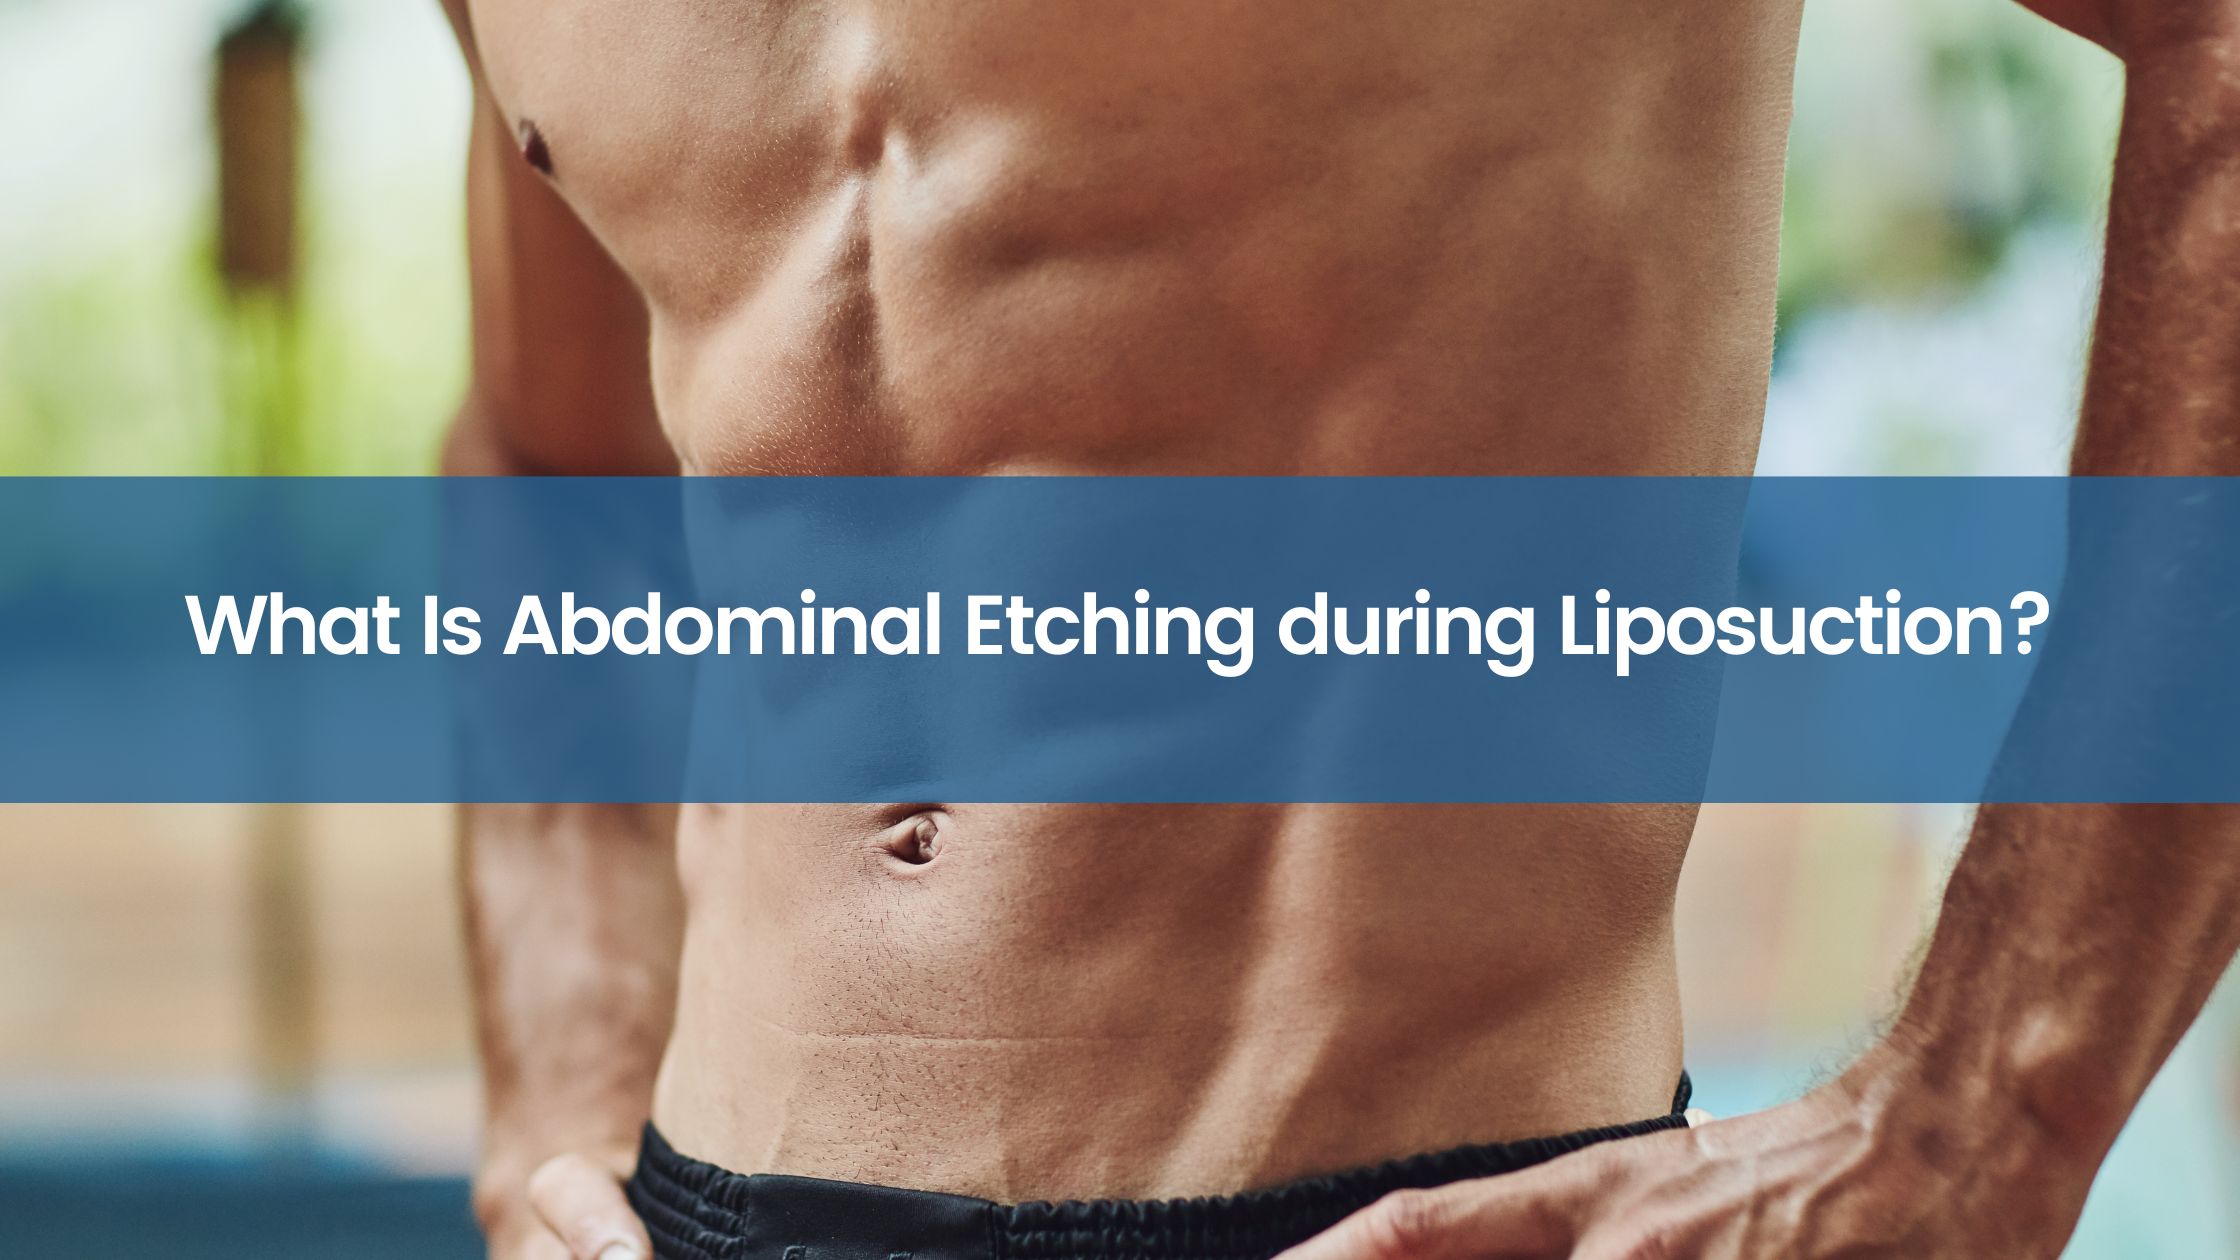 What Is Abdominal Etching during Liposuction?